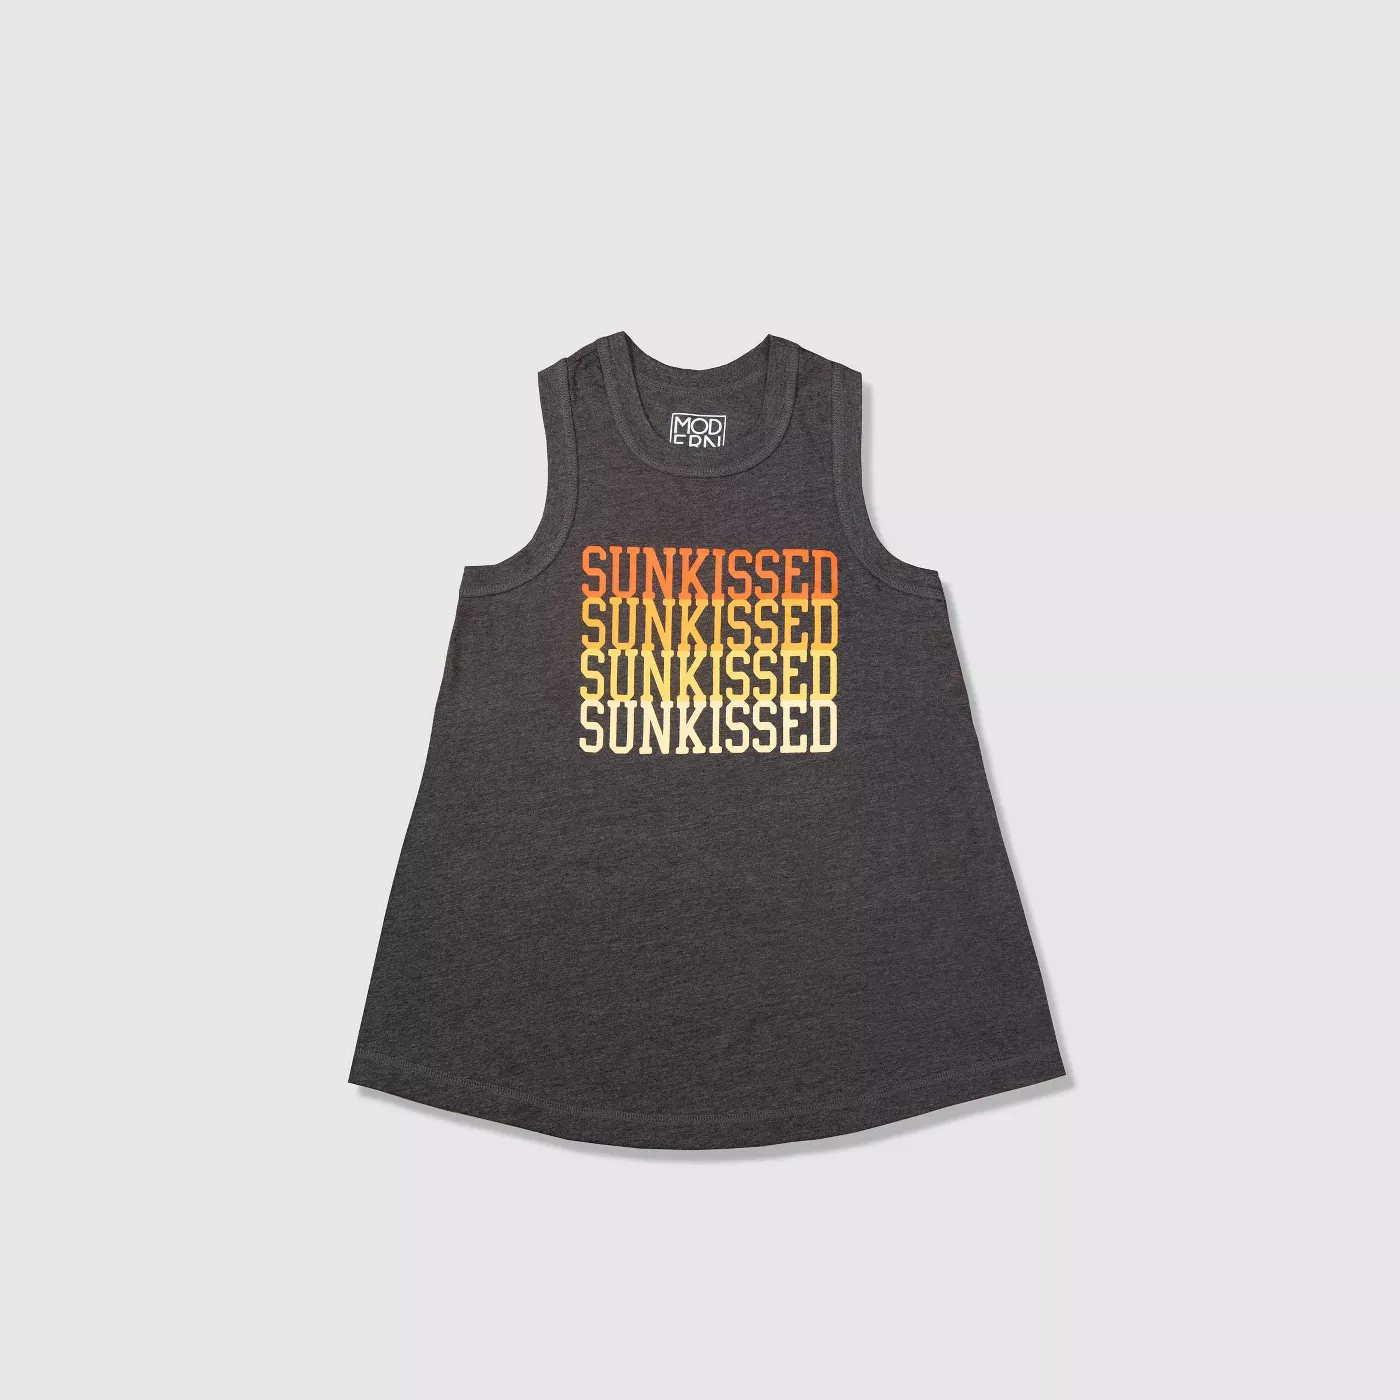 Women's Sunkissed Graphic Tank Top - (Regular & Plus) Charcoal Gray - image 1 of 4